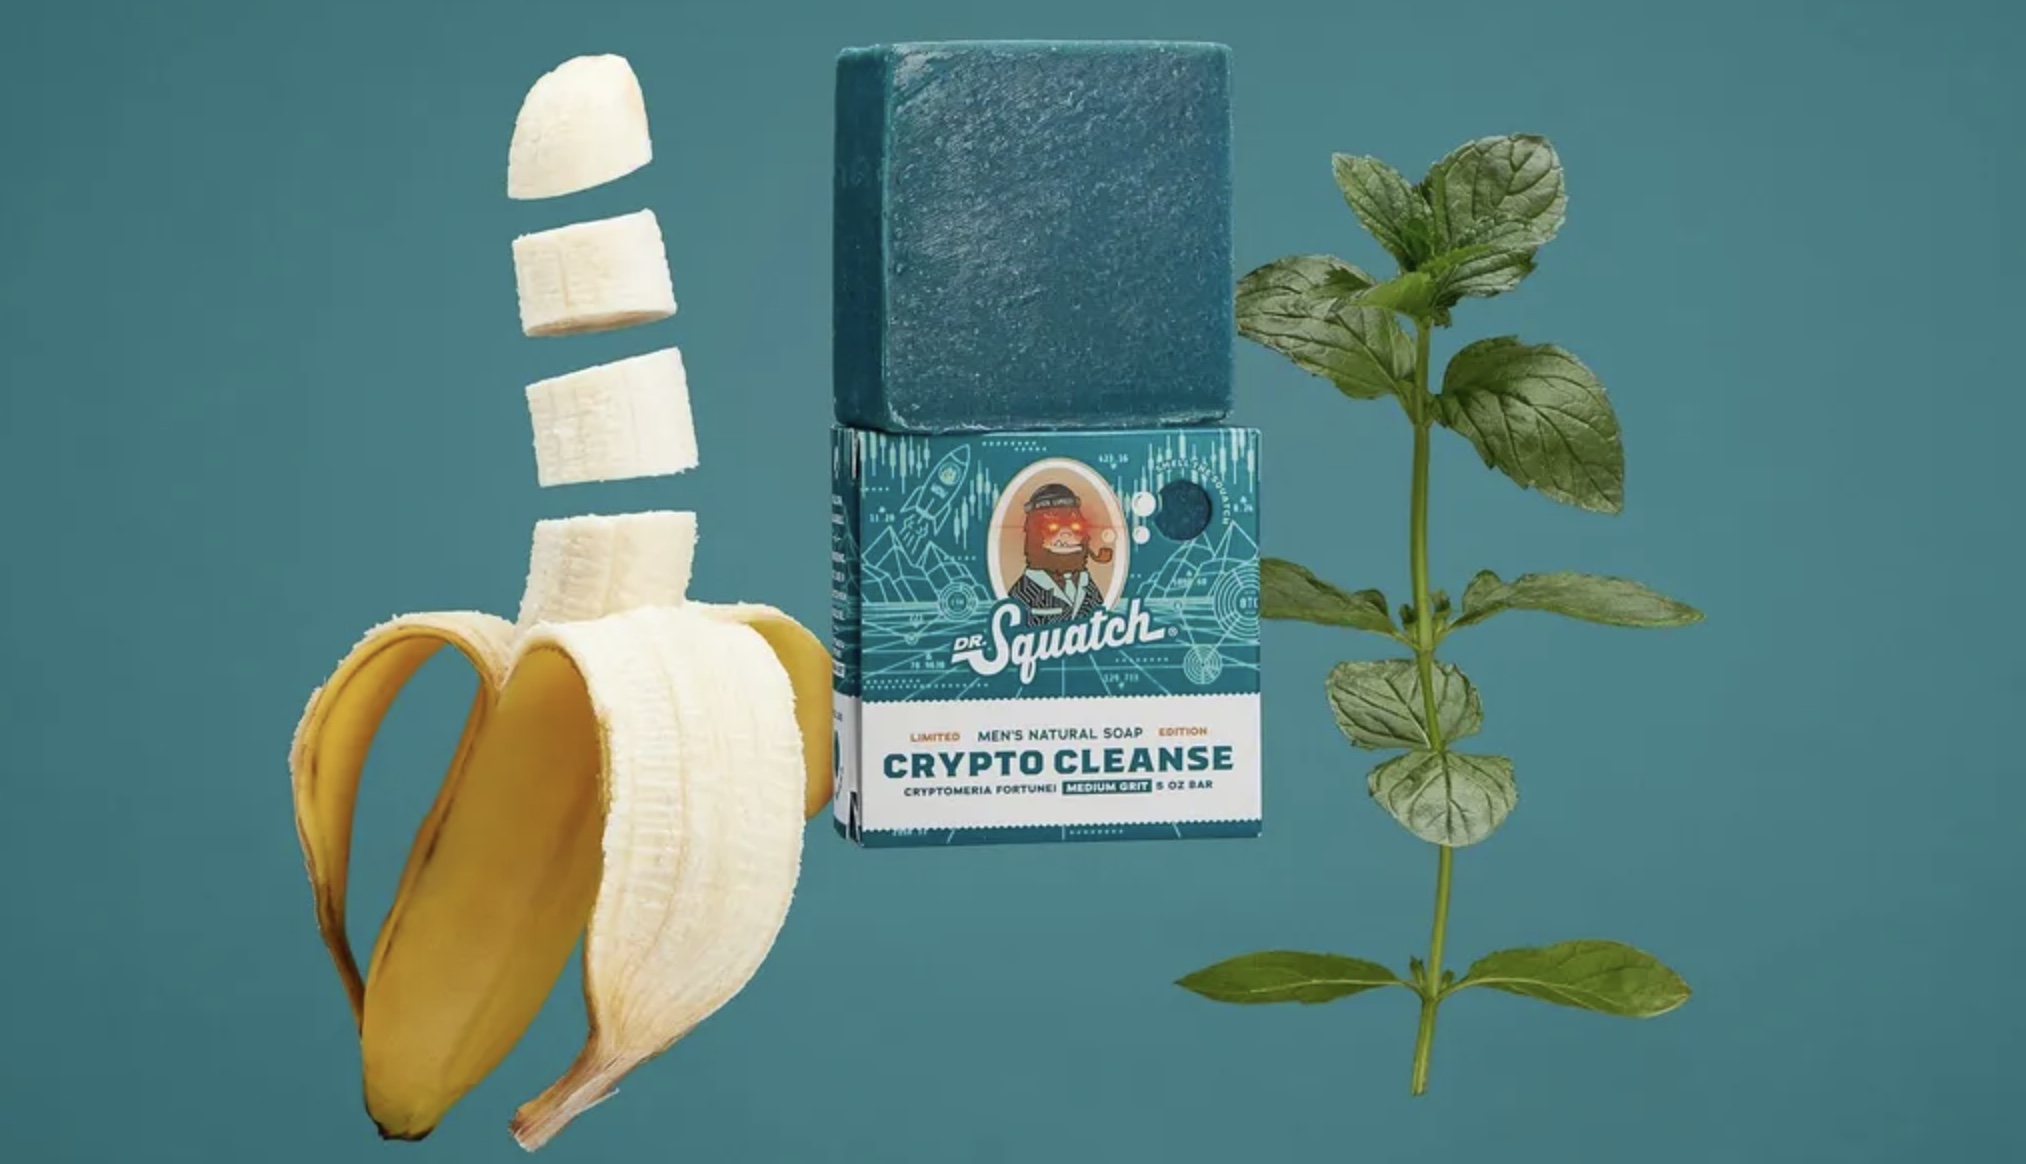 How Dr Squatch's 31-year-old founder makes millions selling soap online